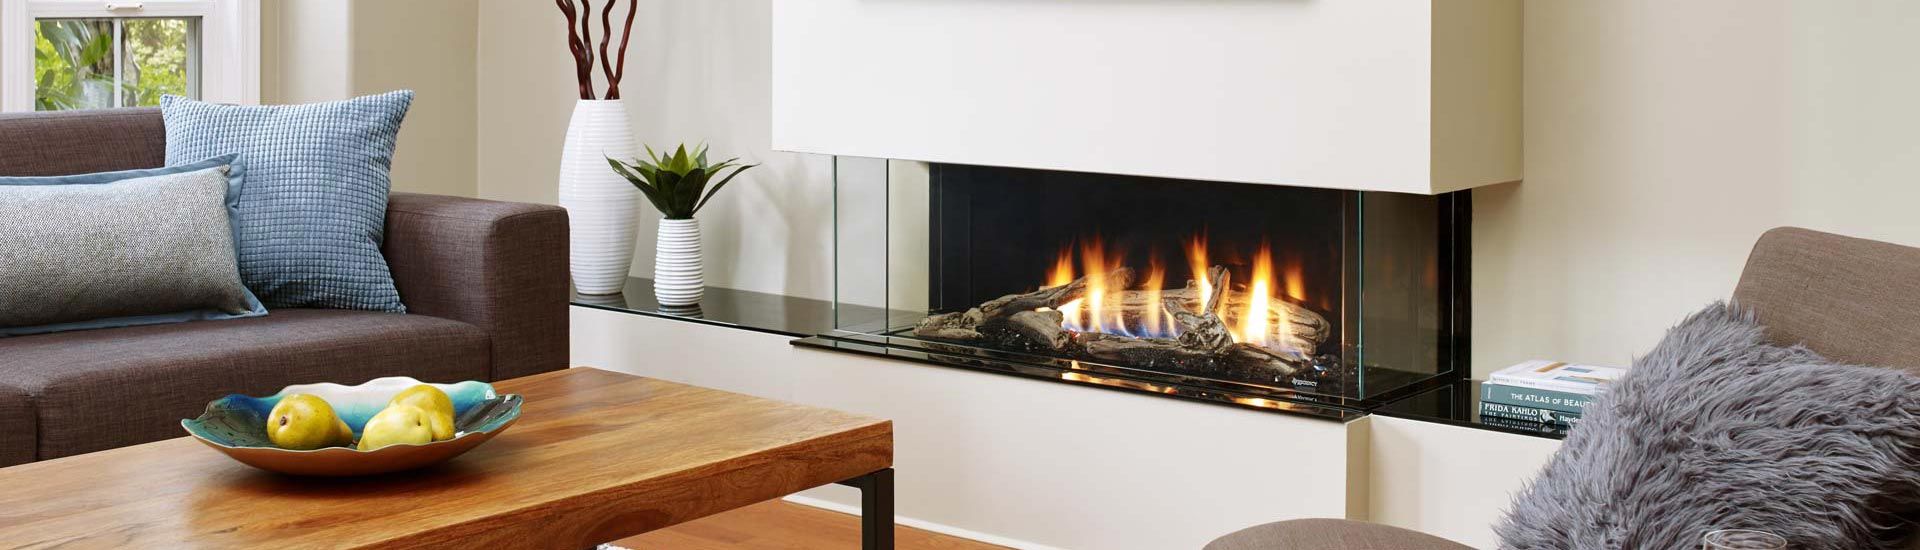 Floating Fireplace Luxury Mister Chimney & Nova Fireplaces Helps Us to Convert the